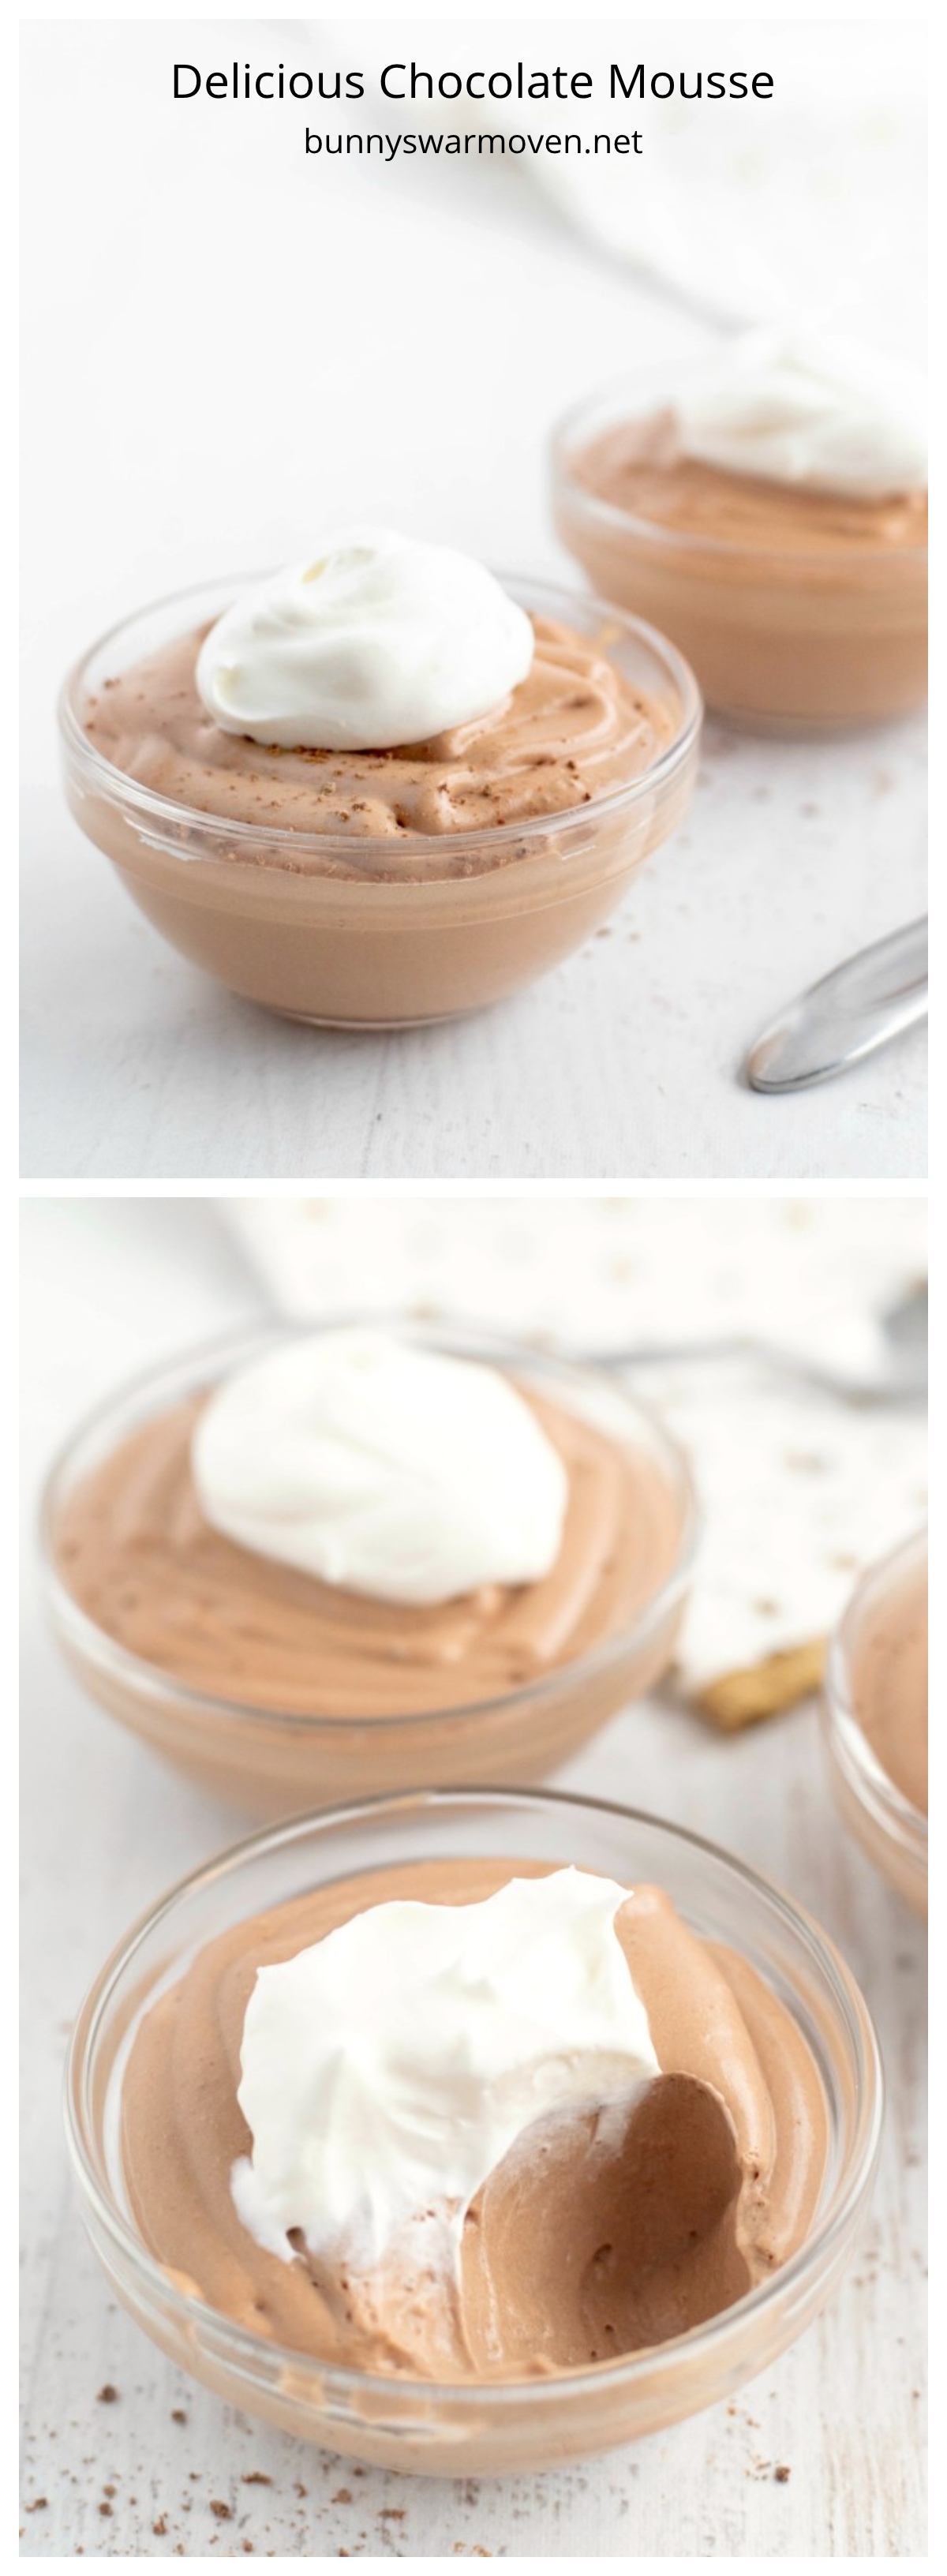 Delicious Chocolate Mousse